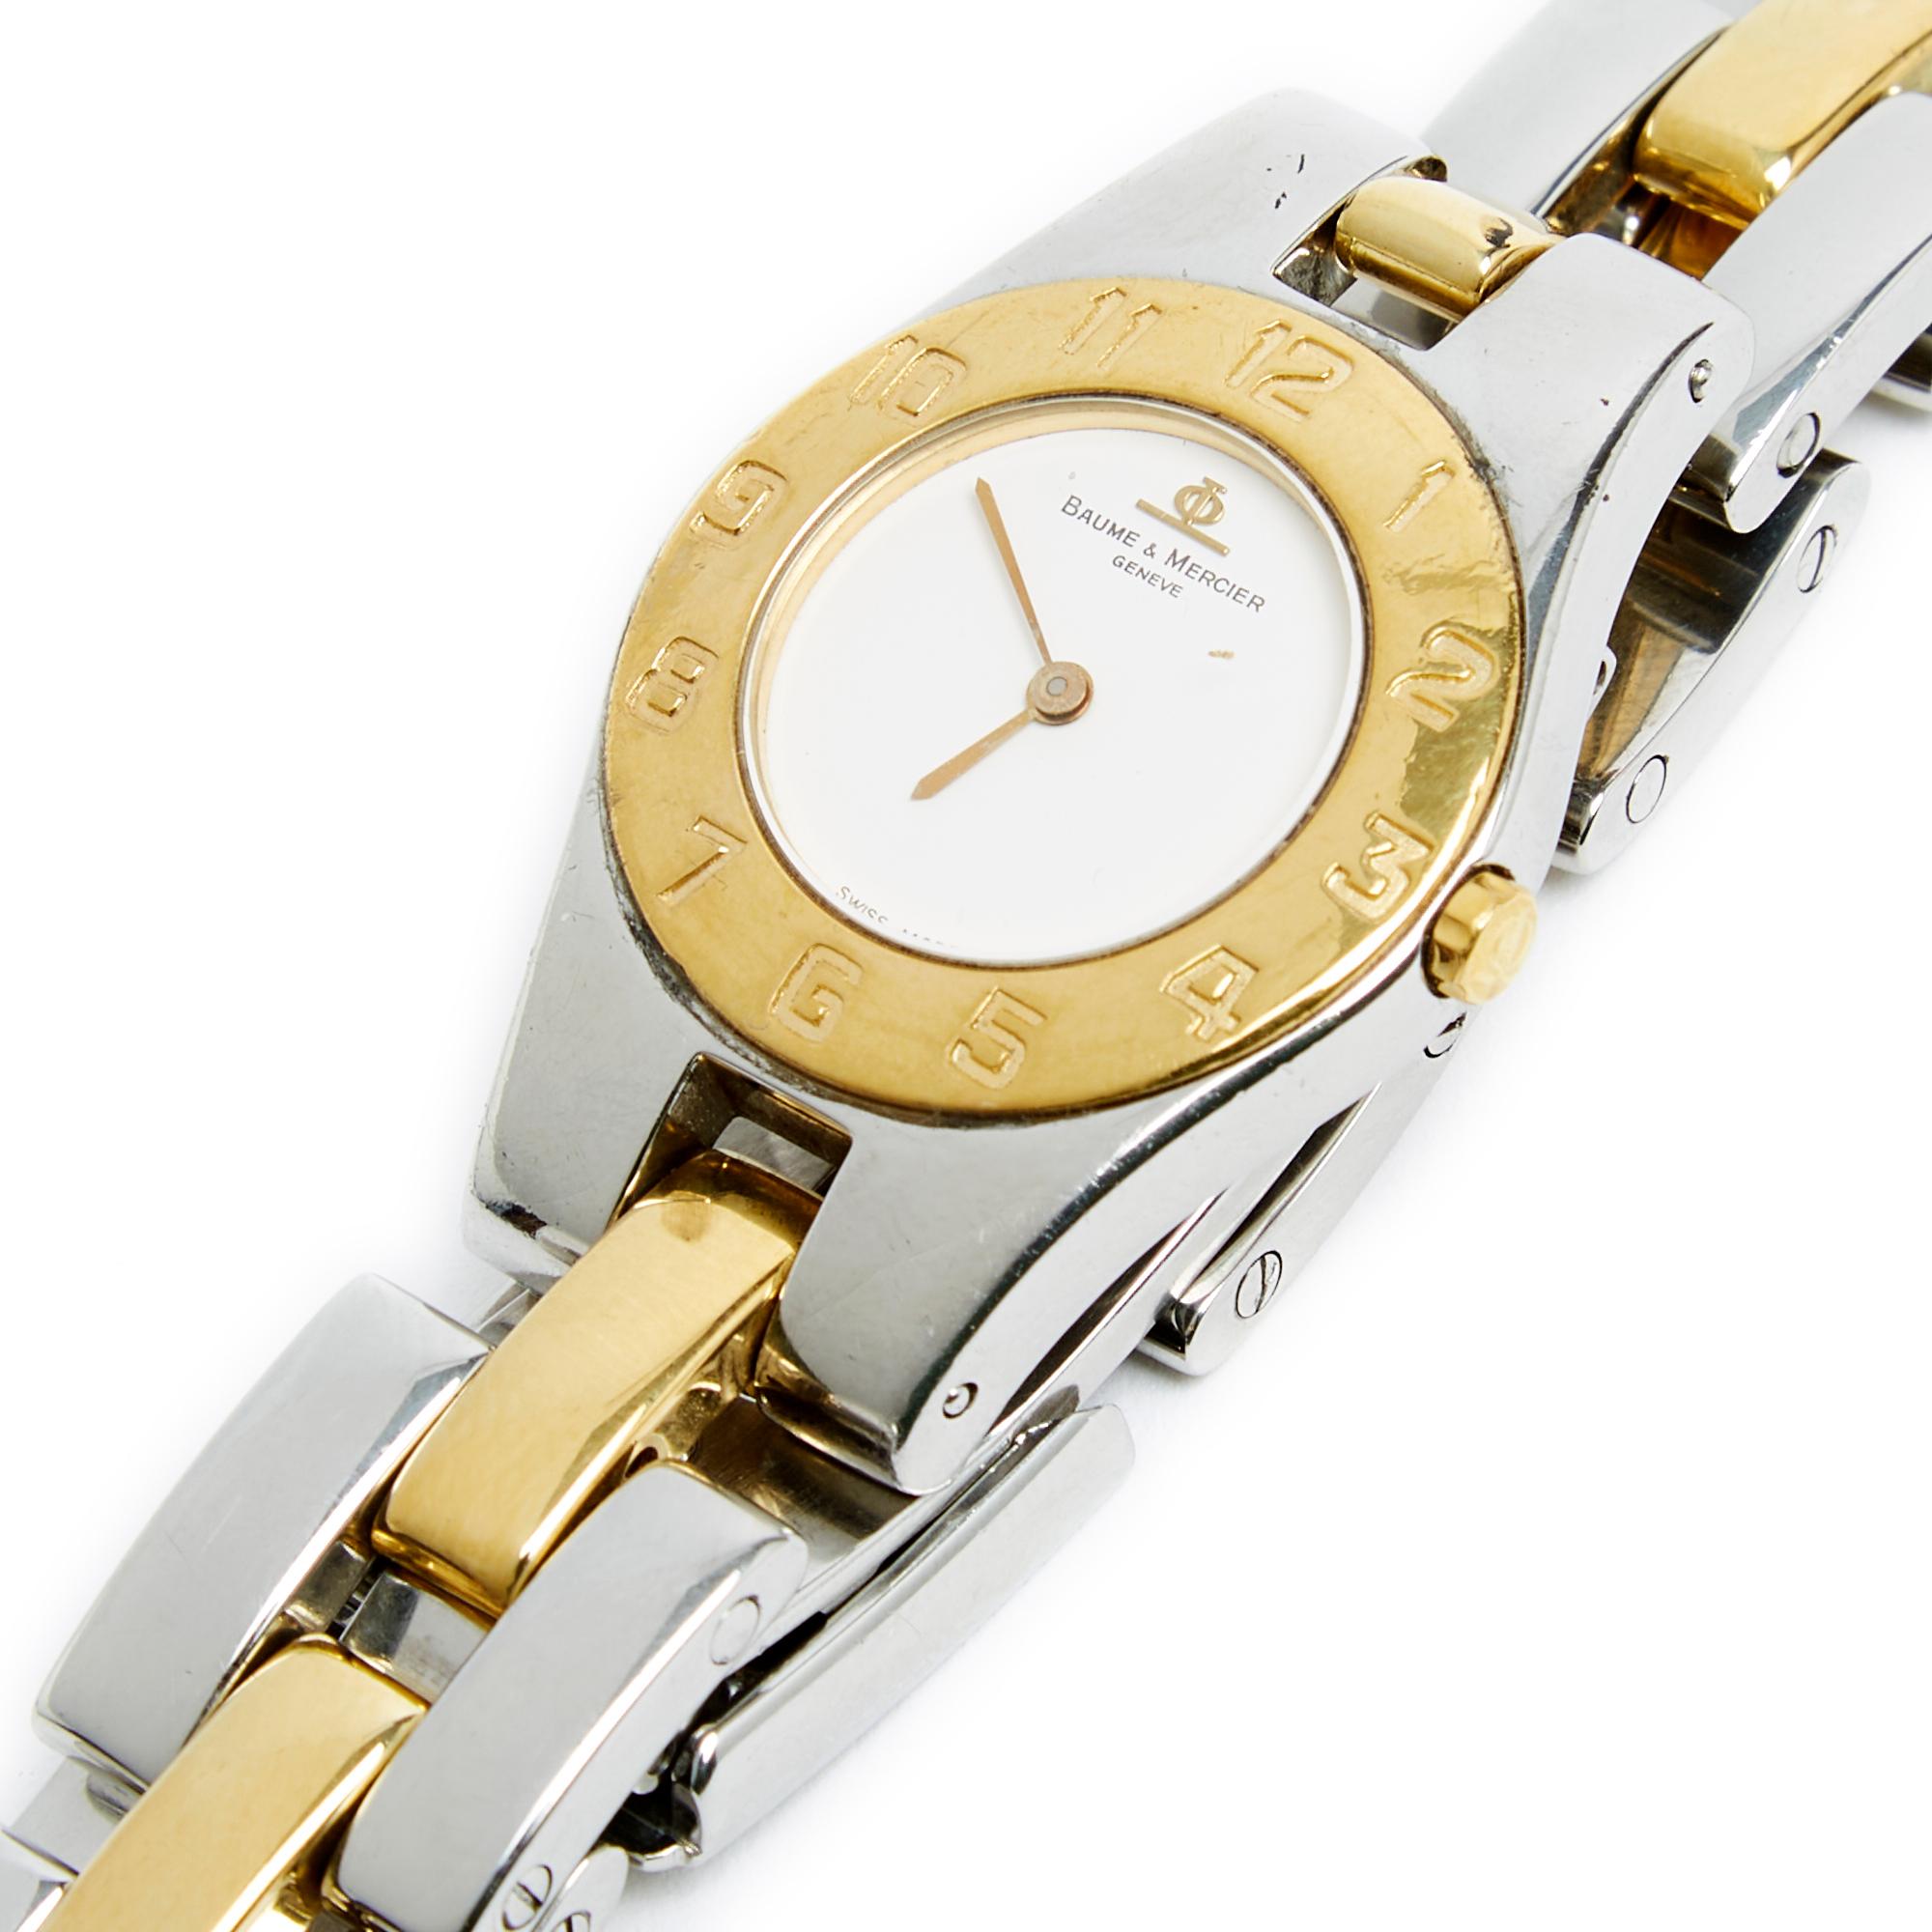 Baume & Mercier Linea Lady model watch in steel and gold-plated metal, quartz movement, white background, indexes on the bezel, steel and gold-plated rice grain mesh bracelet, folding clasp. Interior length of the watch 16 cm, case diameter 2.45 cm.